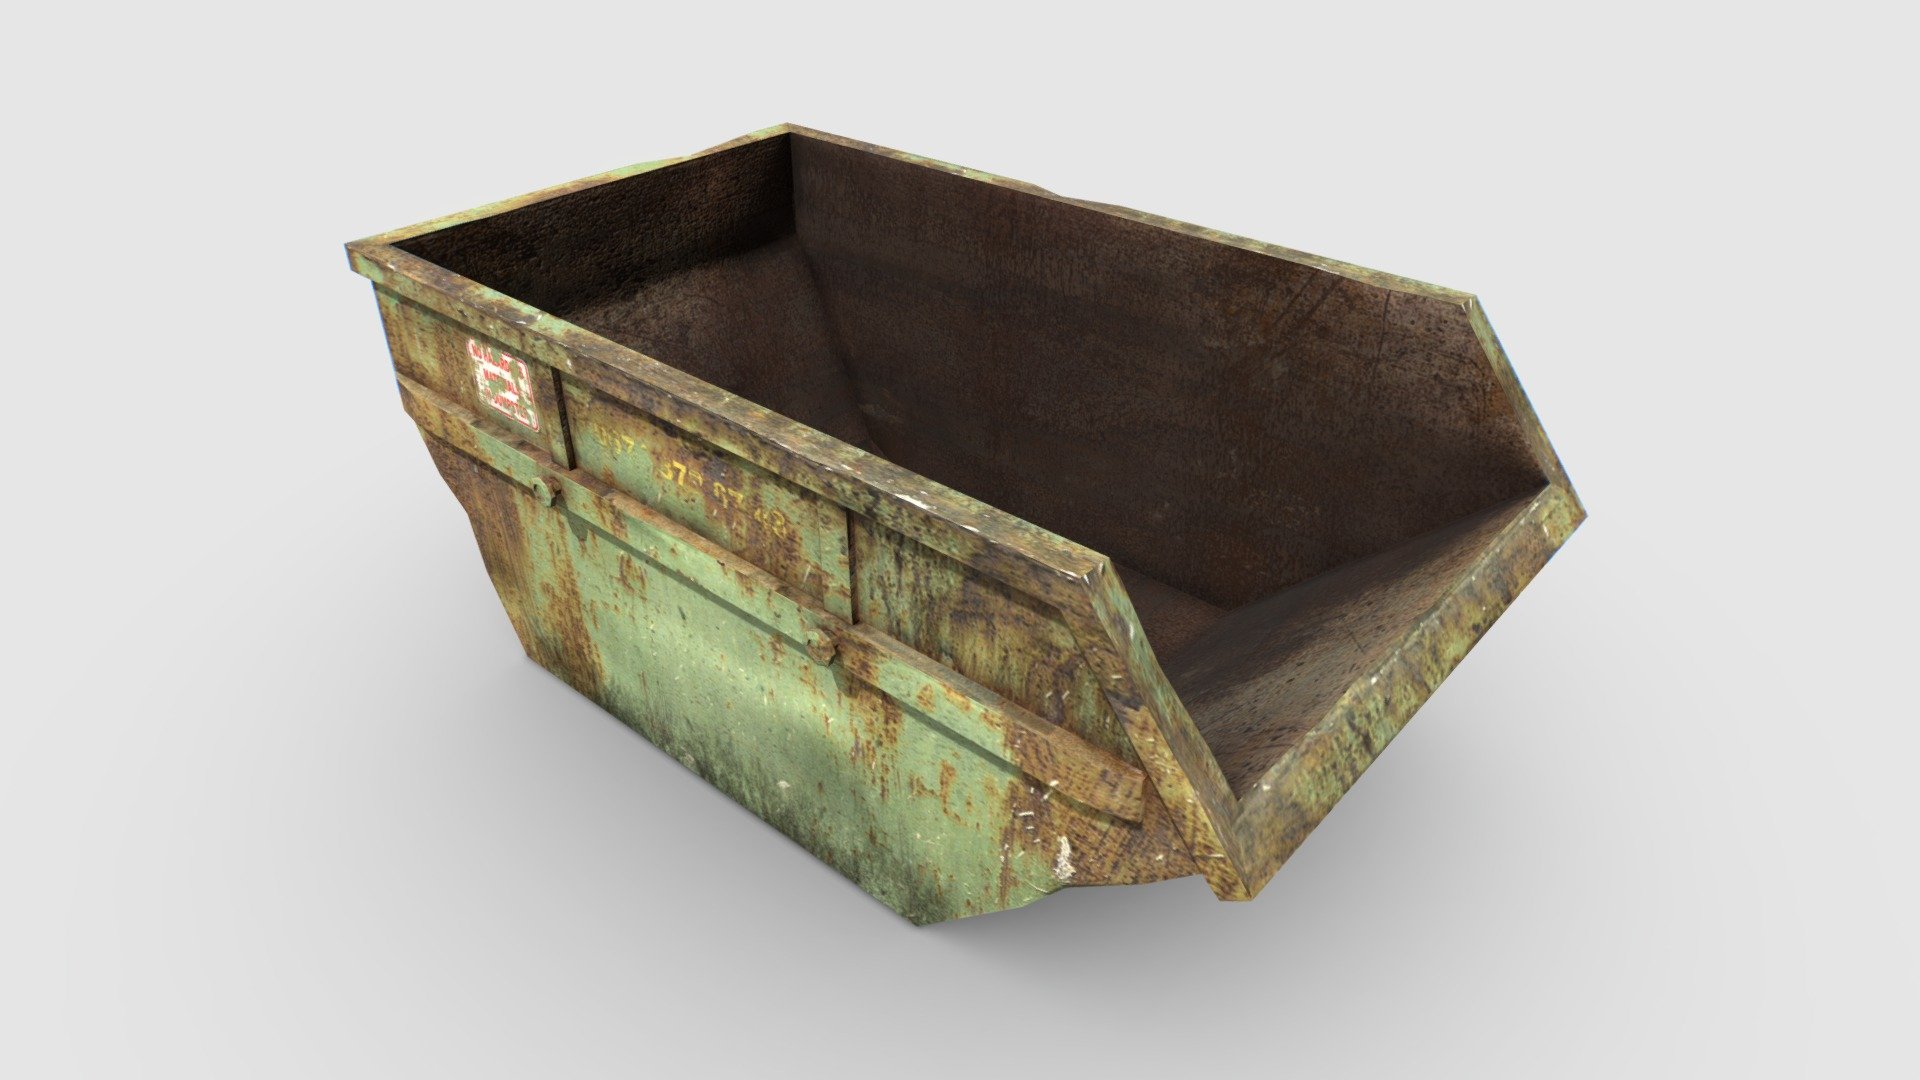 Industrial skip container based in real one. Realistic scale.

Comes with 1 set of PBR 2048p textures including Albedo, Normal, Roughness, Metalness and AO.

Suitable for factories, hangars, warehouses, construction sites, streets, etc. 3d model